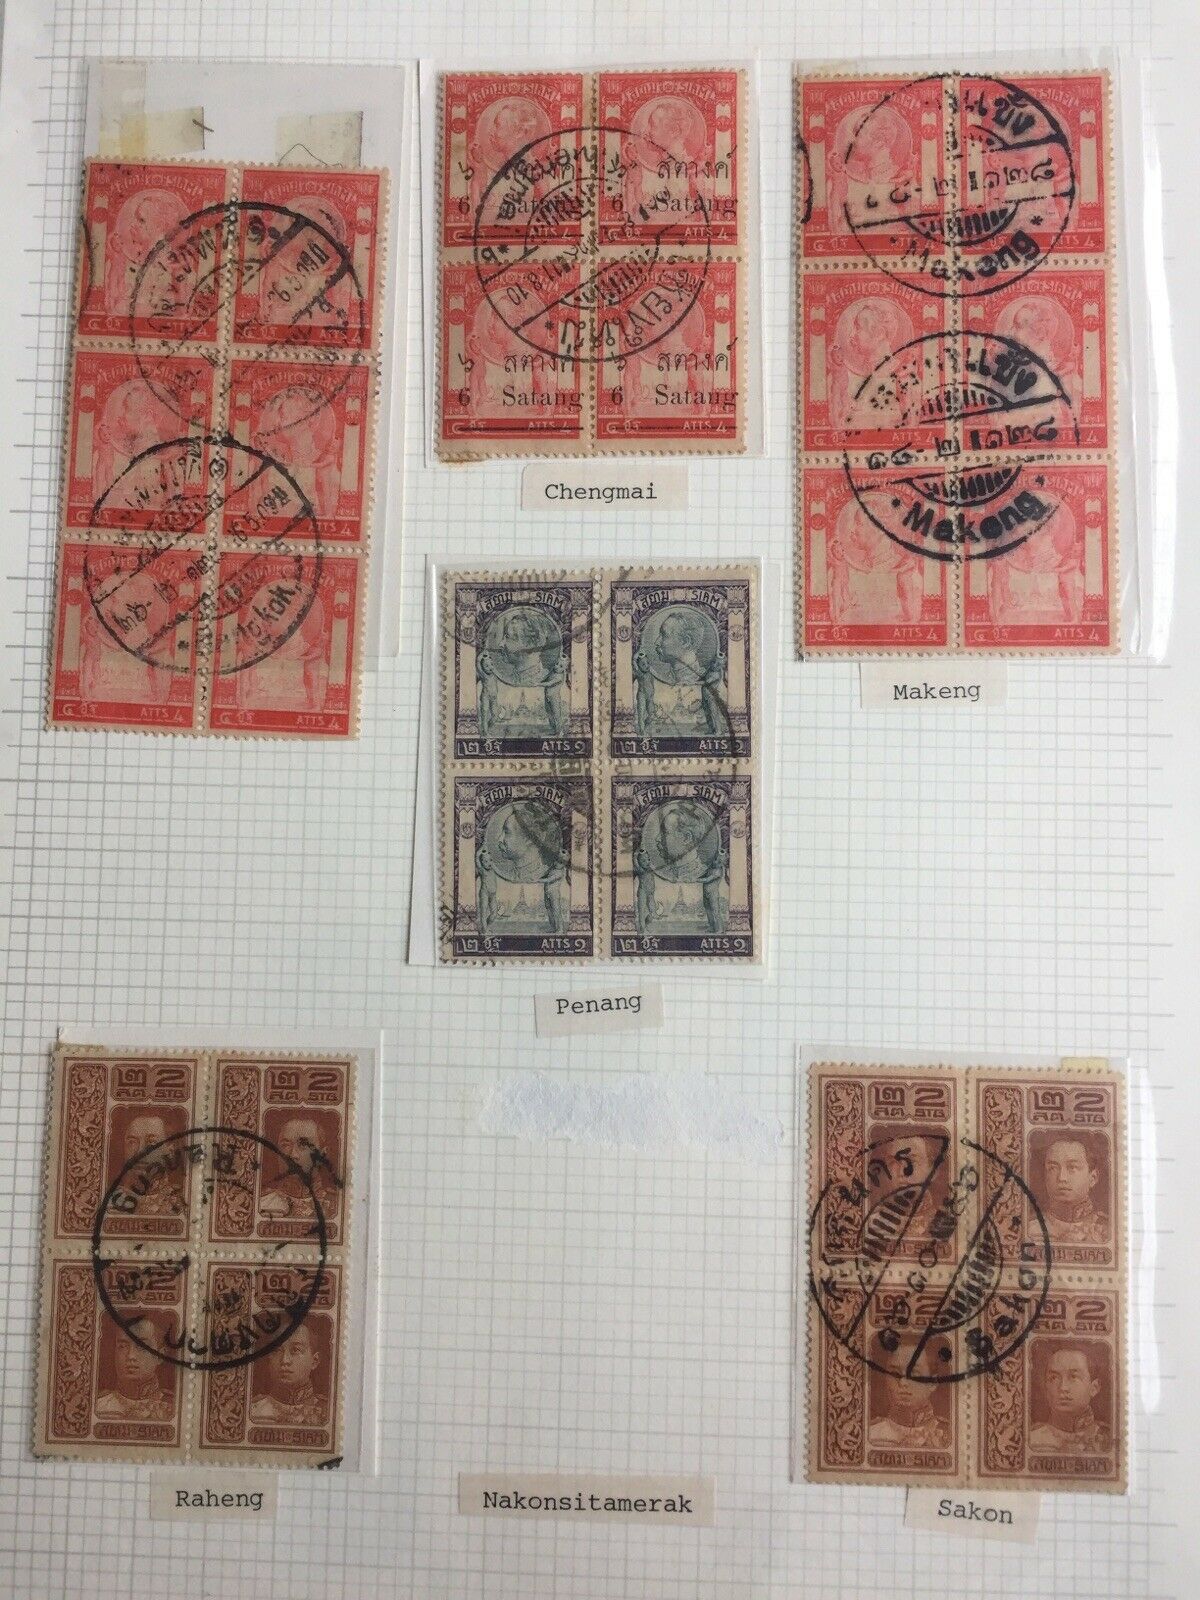 Thailand Pre War Postmark Collection. 4 Pages Includes Blocks of 4 1910 UPU